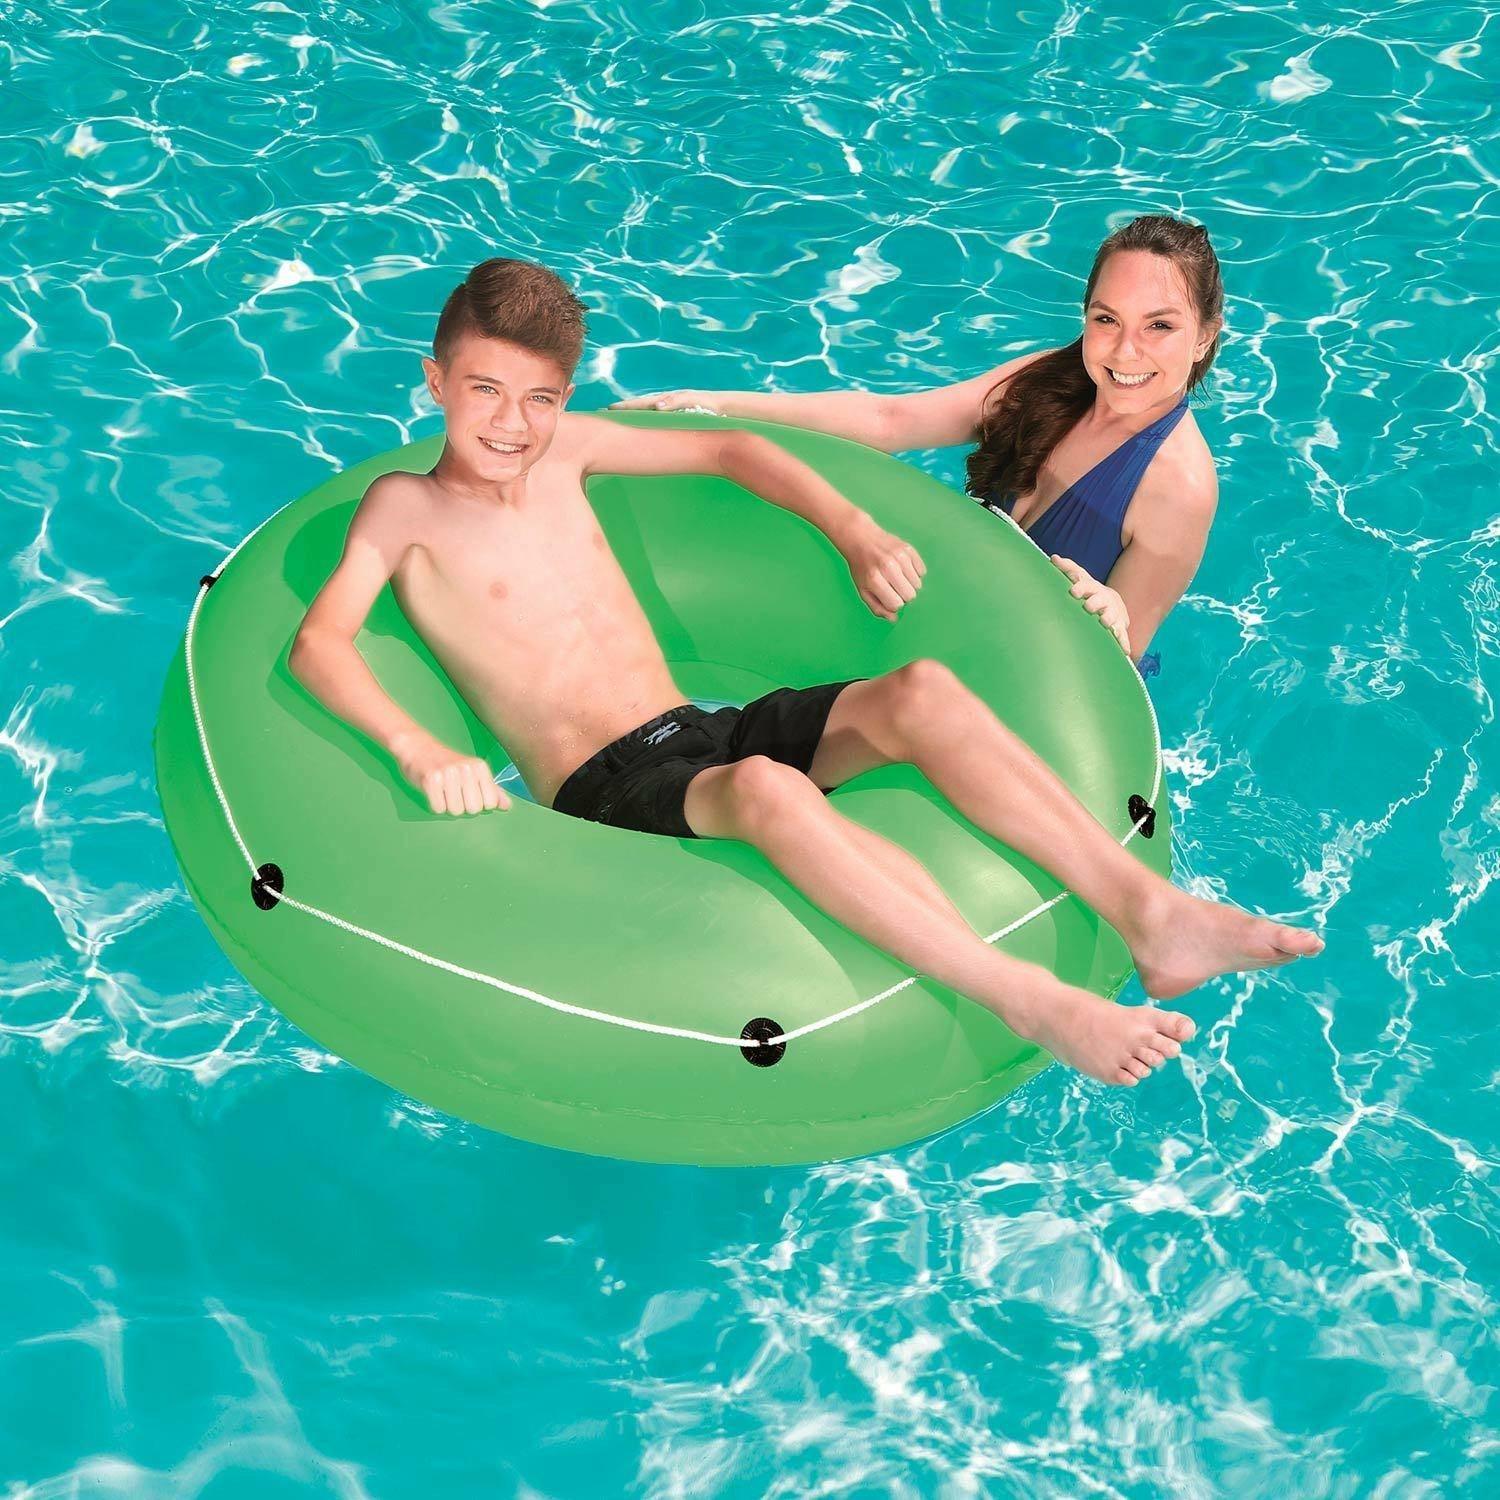 Bestway 36120 Inflatable Swim Ring 119 cm - Green - BumbleToys - 8-13 Years, Boys, Eagle Plus, Floaters, Girls, Sand Toys Pools & Inflatables